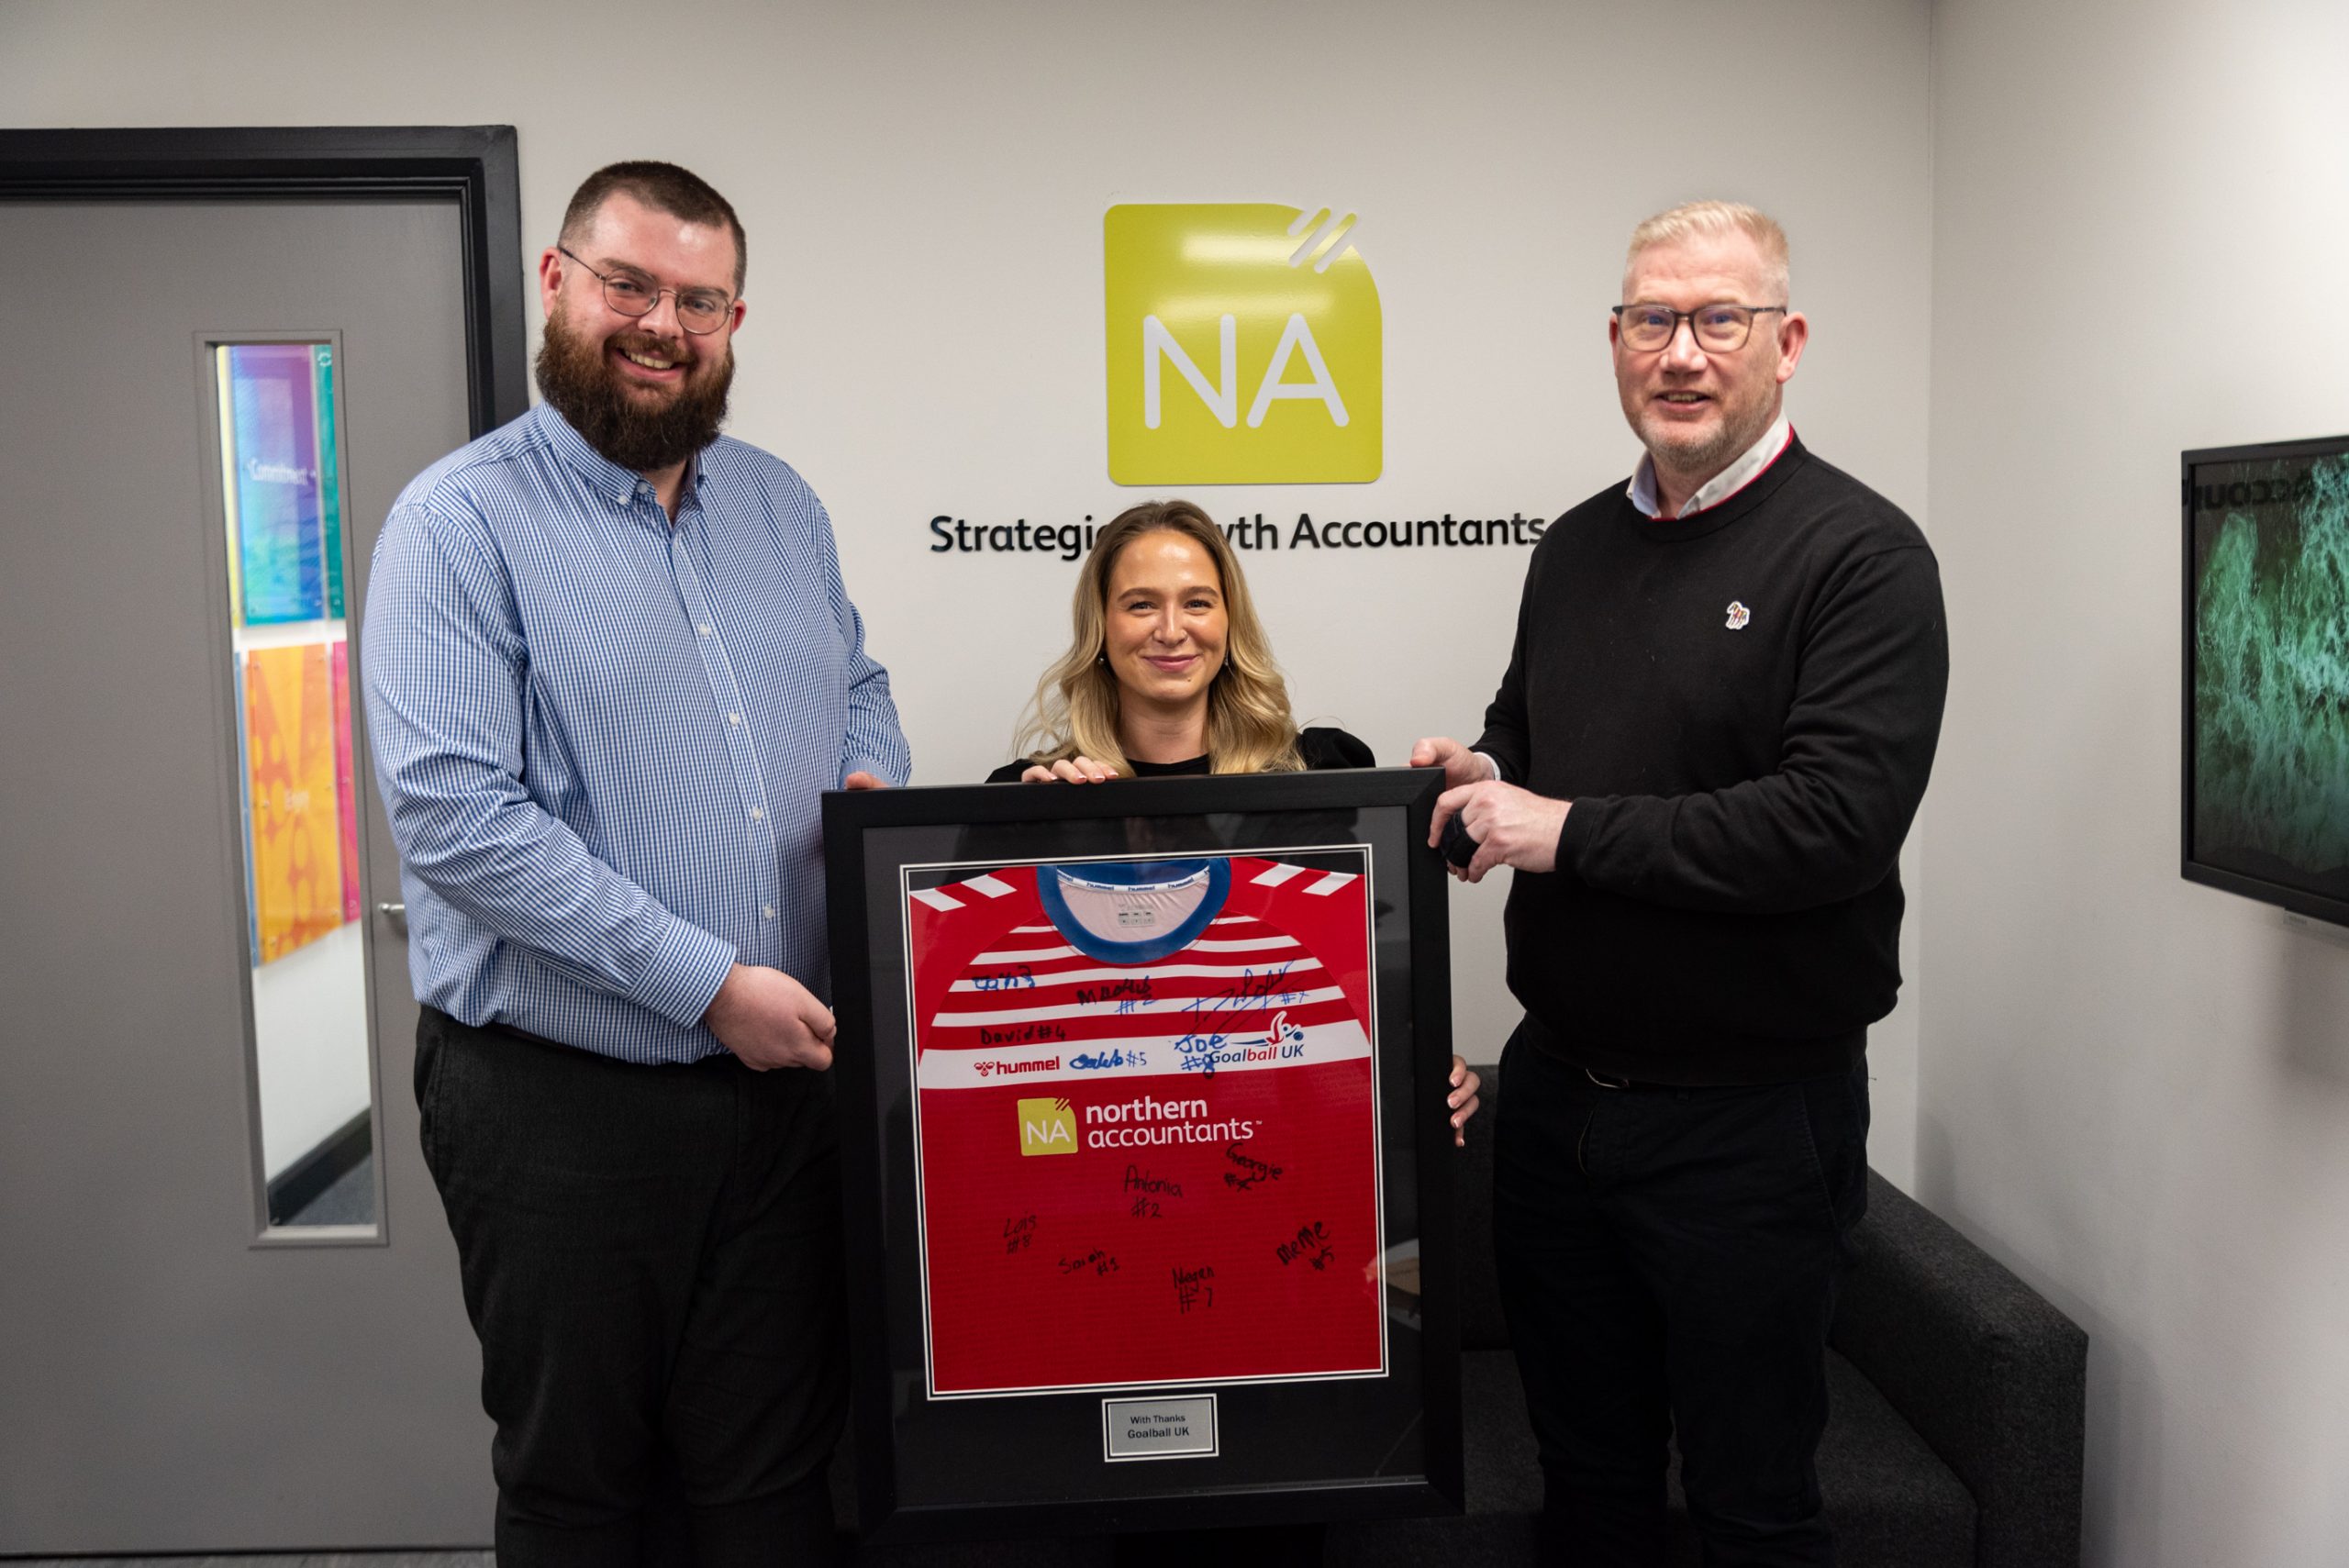 Three people in smart clothing hold up a large frame with a signed GB goalball shirt in it. Two people are from Northern Accountants and the third is Mark Winder, CEO of Goalball UK.